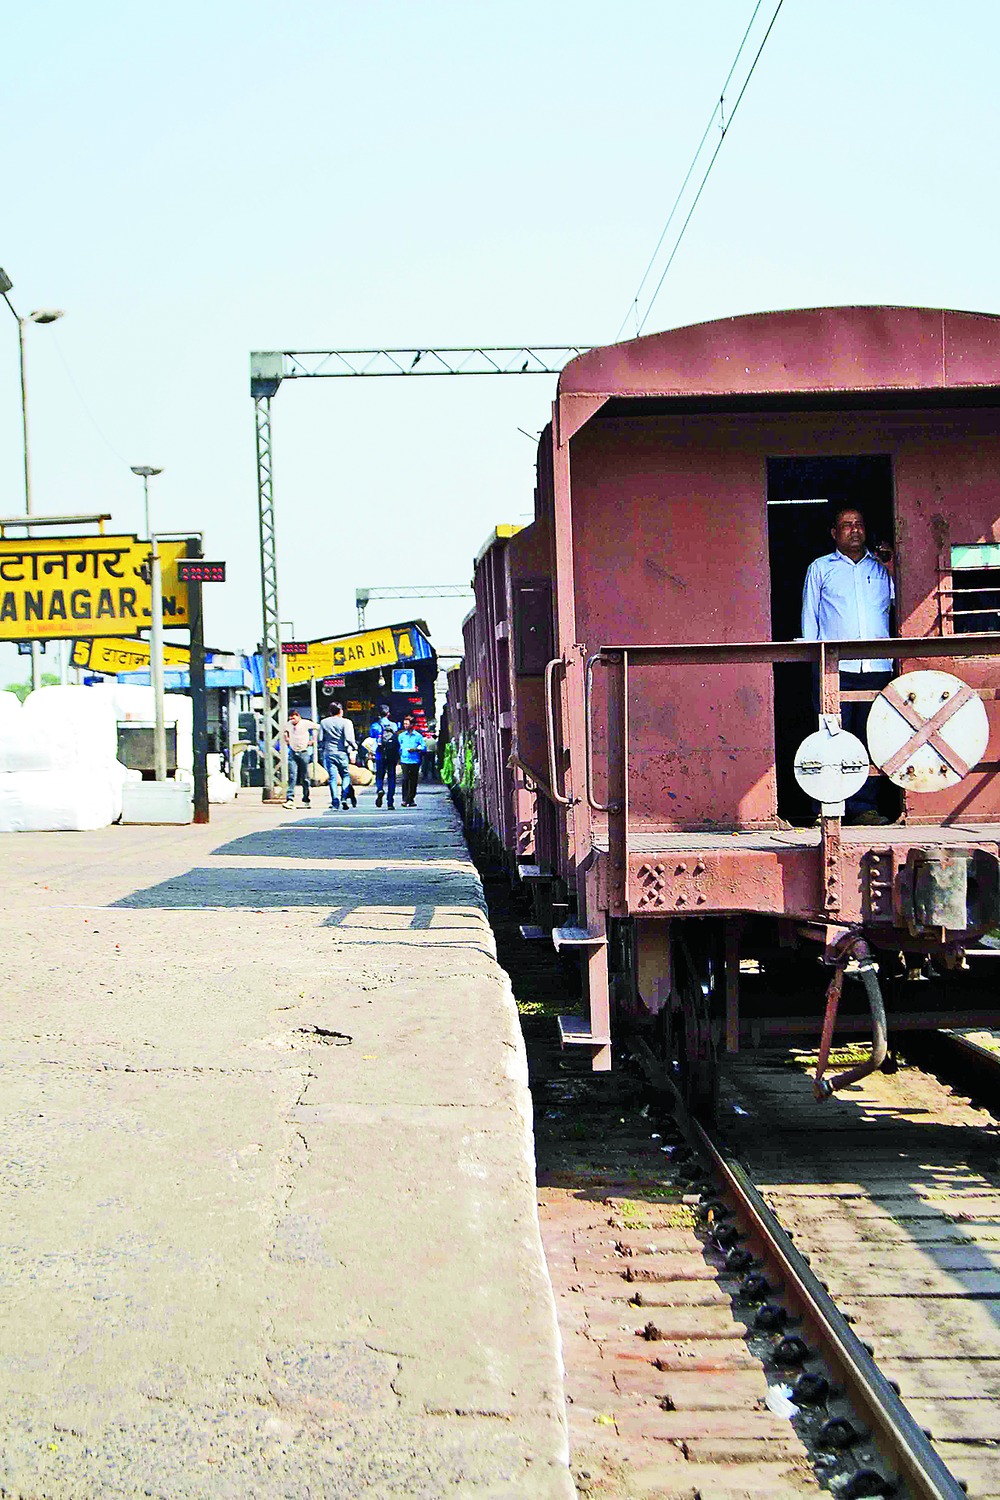 Man jumps in front of train Telegraph India